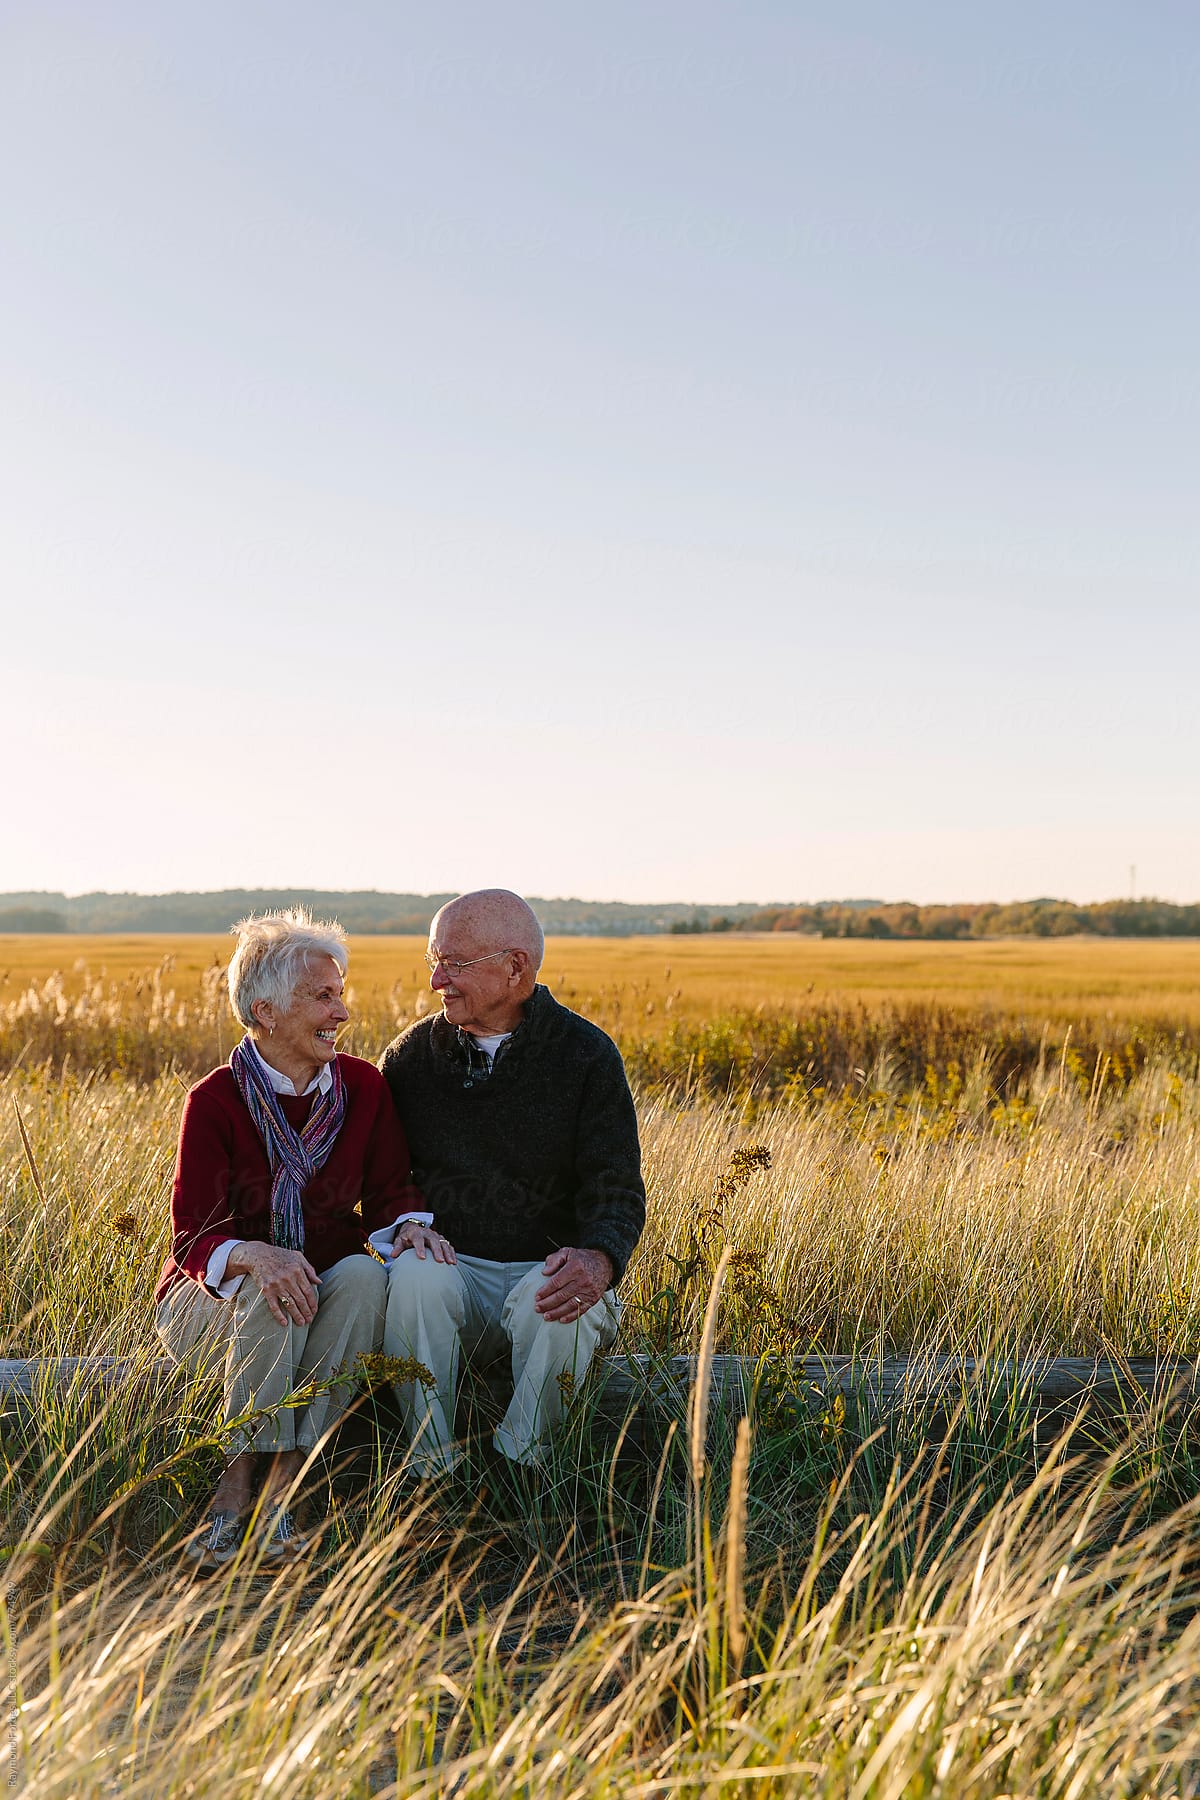 Senior couple Relaxing together by beach Grass